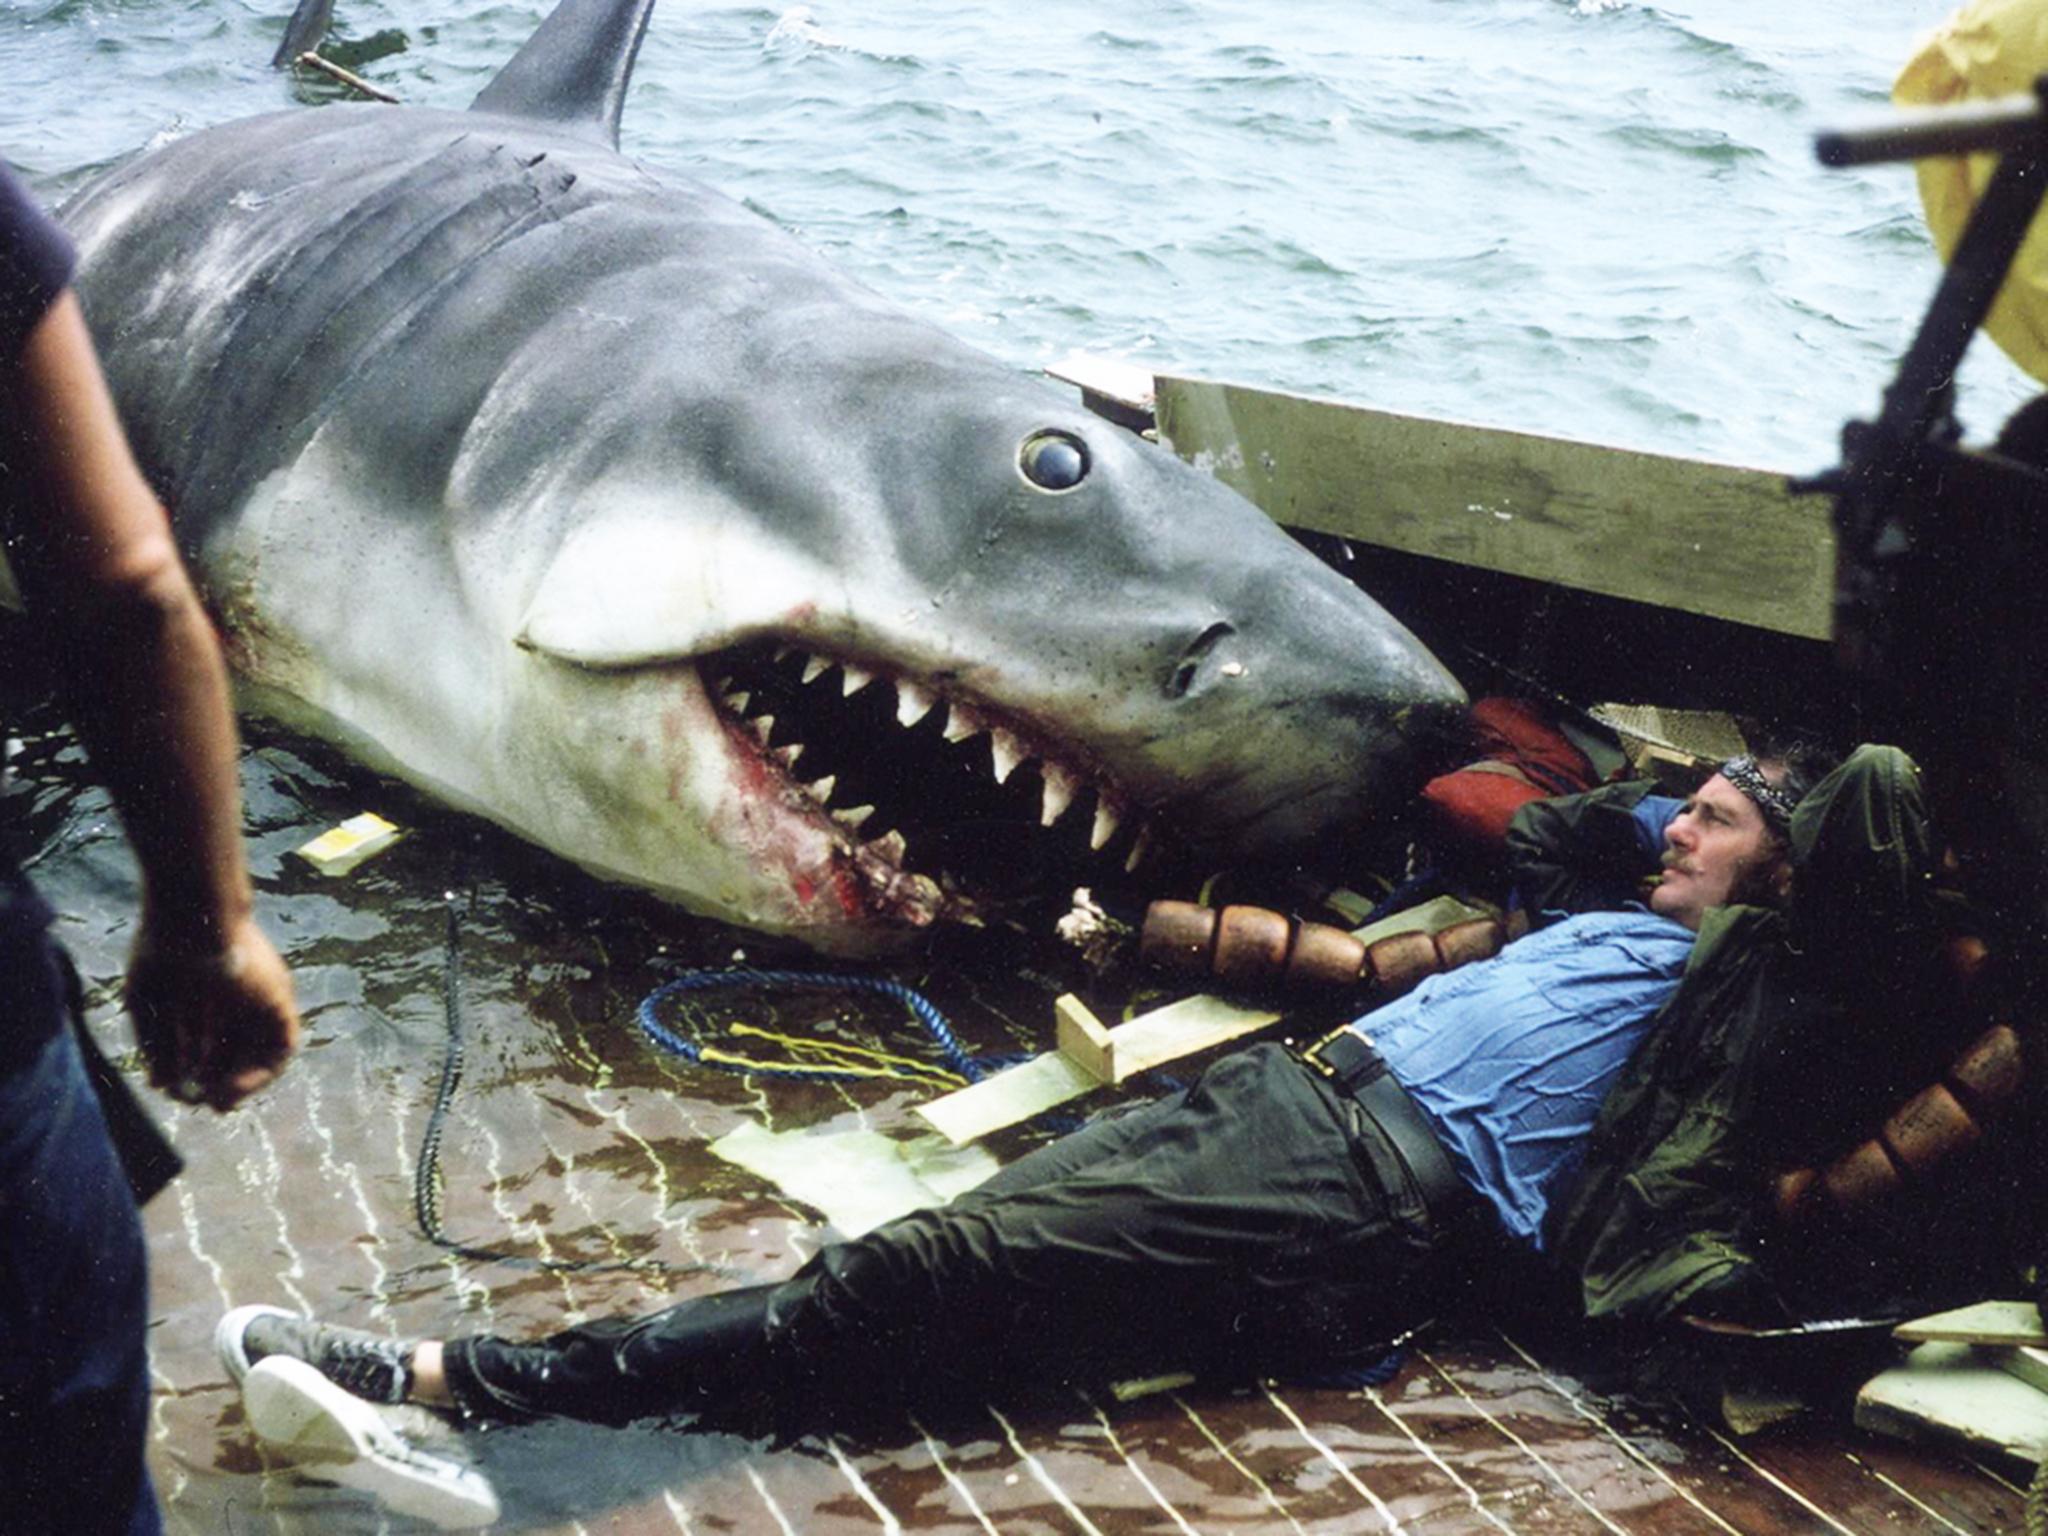 Robert Shaw and "Bruce" the shark behind the scenes of Jaws (1975)